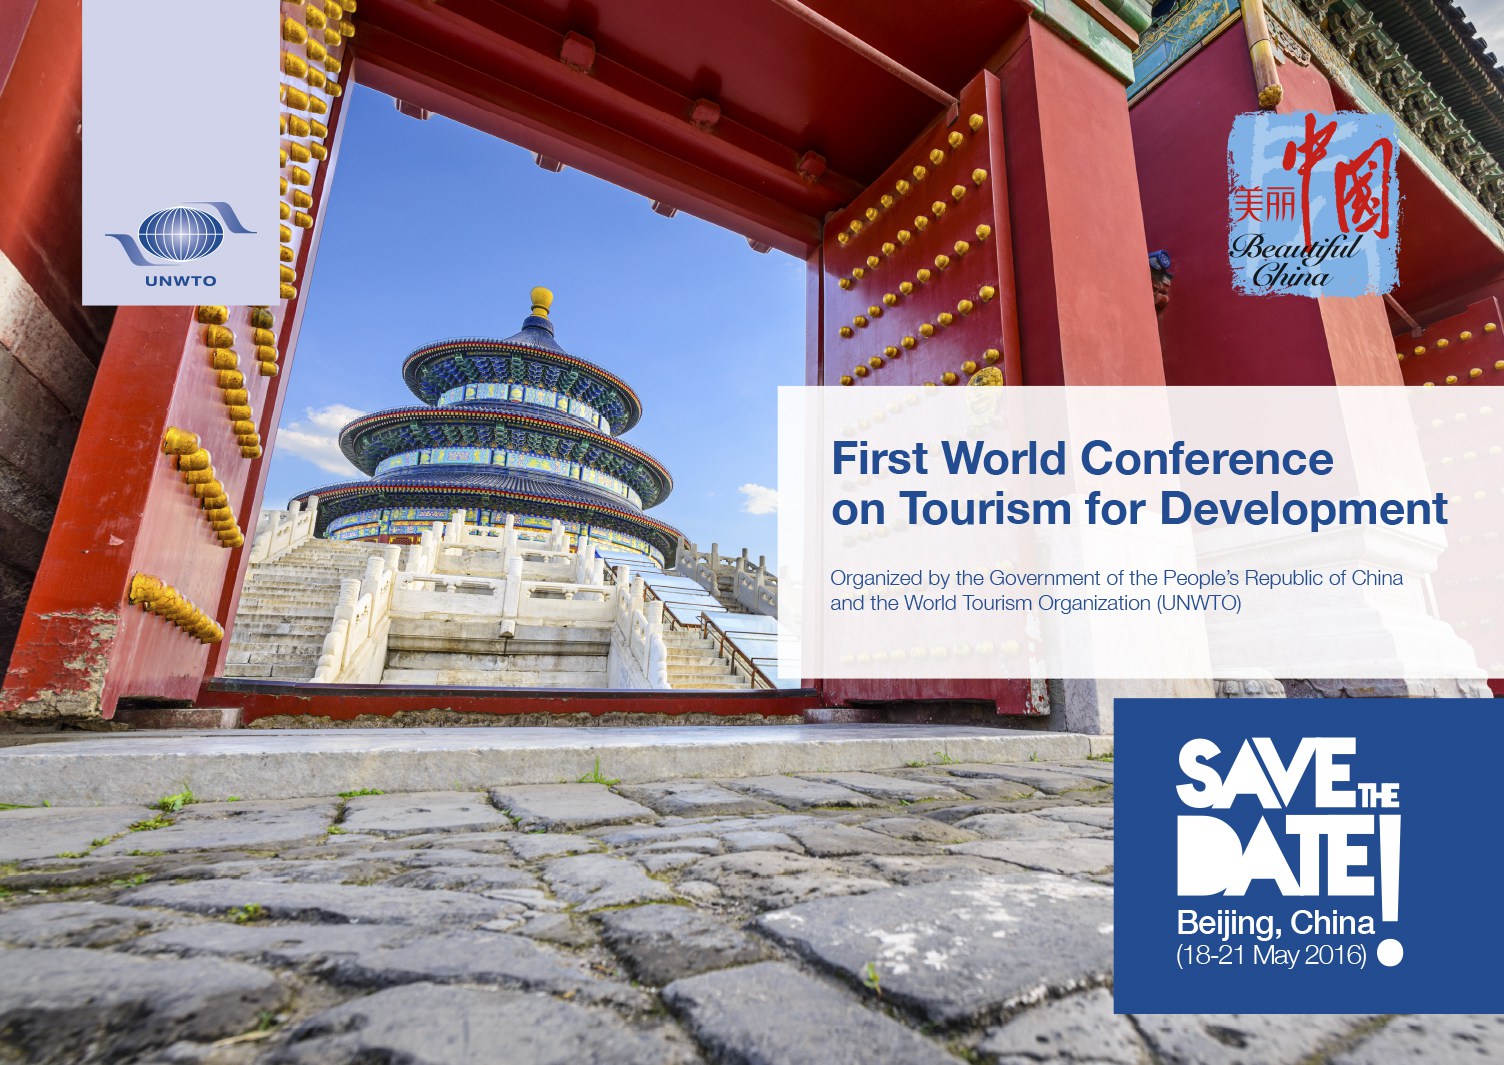 emailing_Save-the-Date_First-World-Conference-on-Tourism-for-Development.jpg